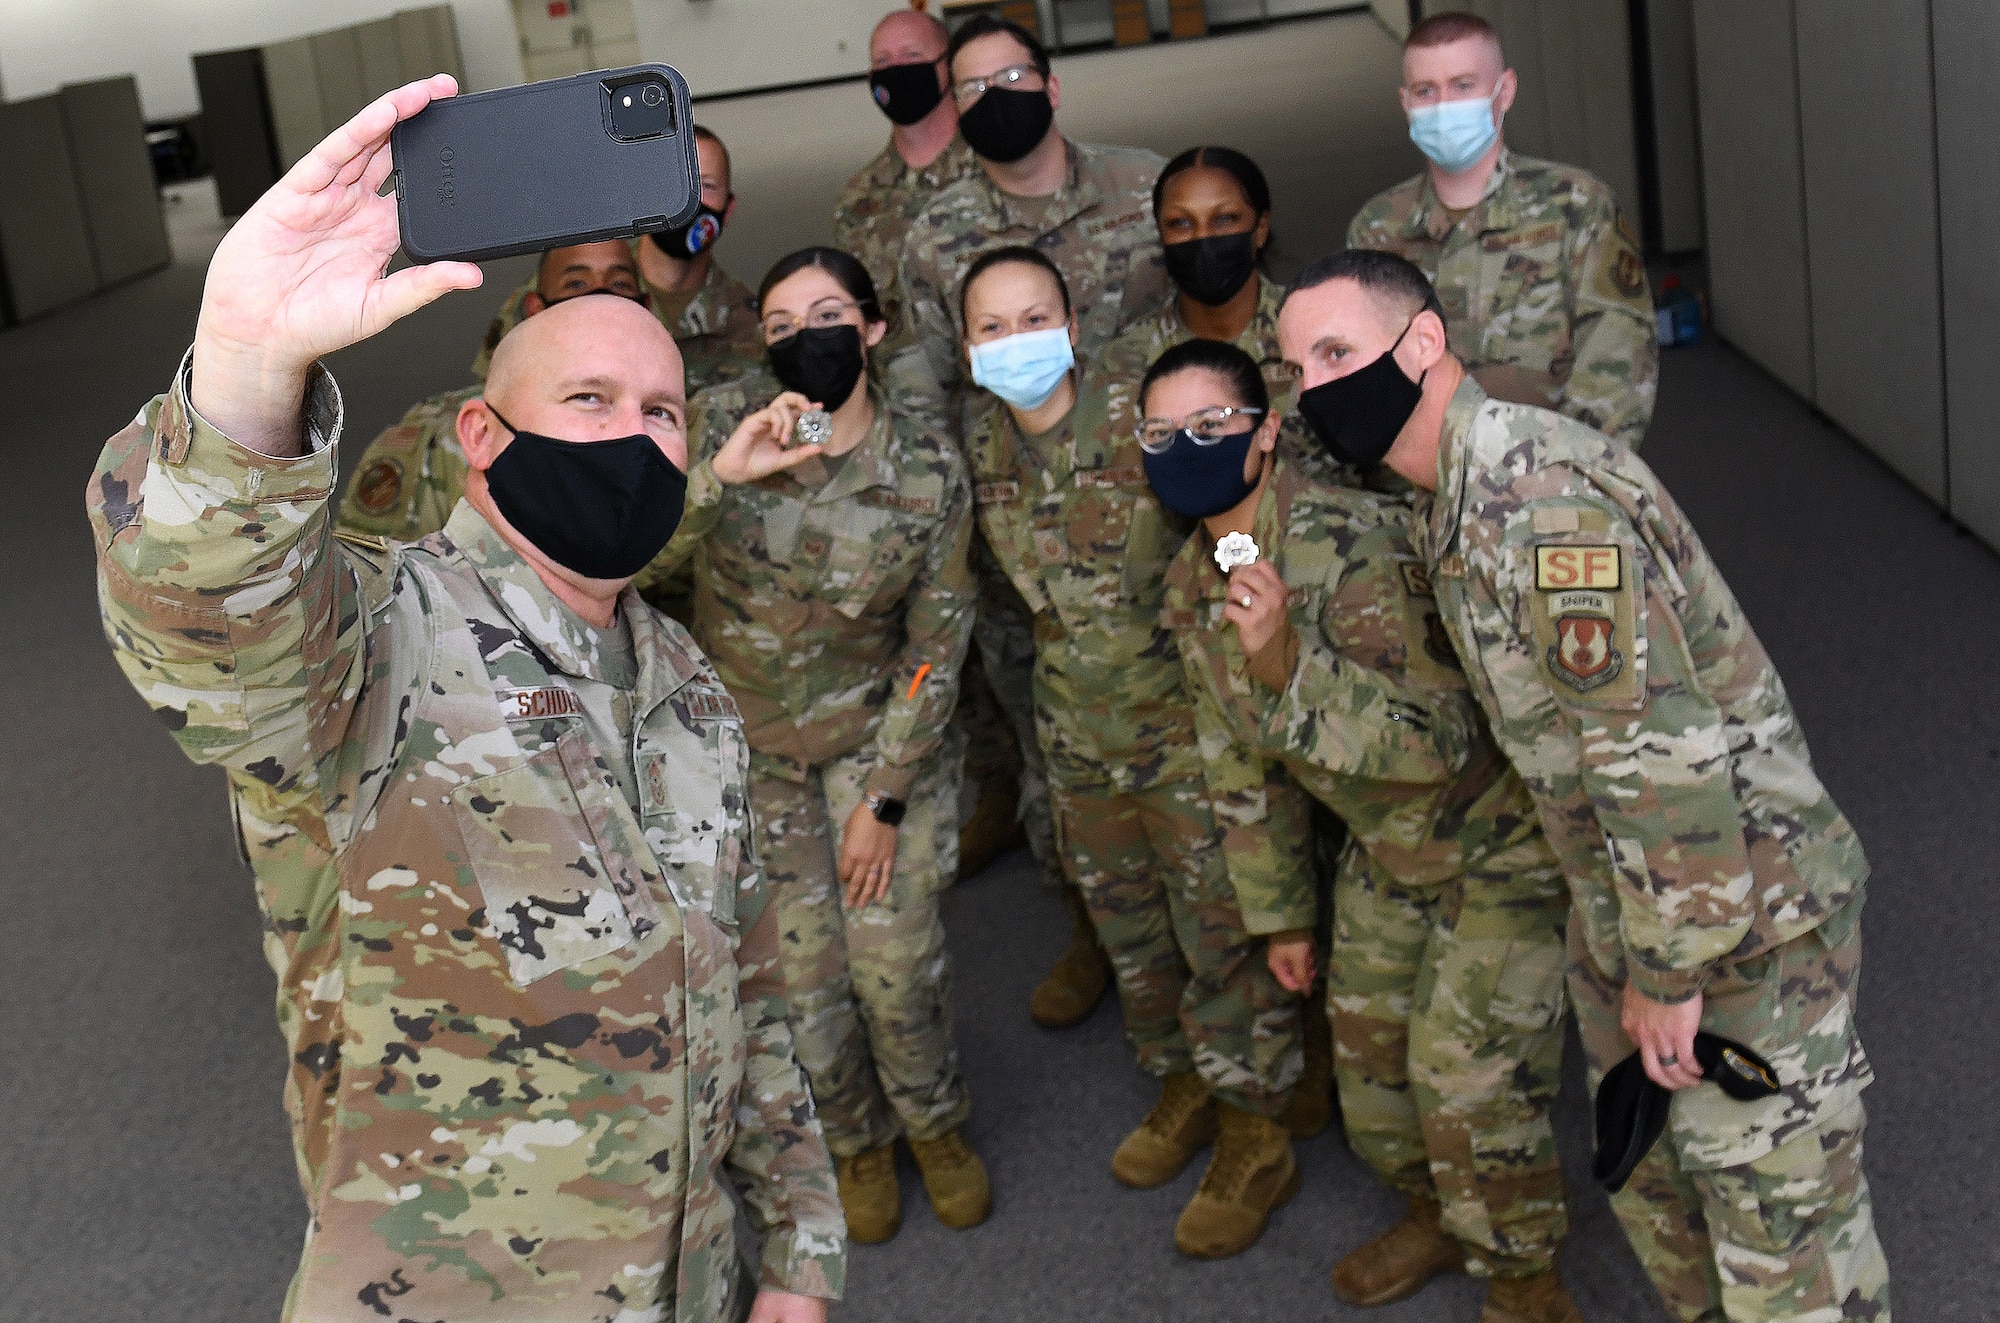 Photo shows a man holding a cell phone up with a group of Airmen behind him all posing for the camera.